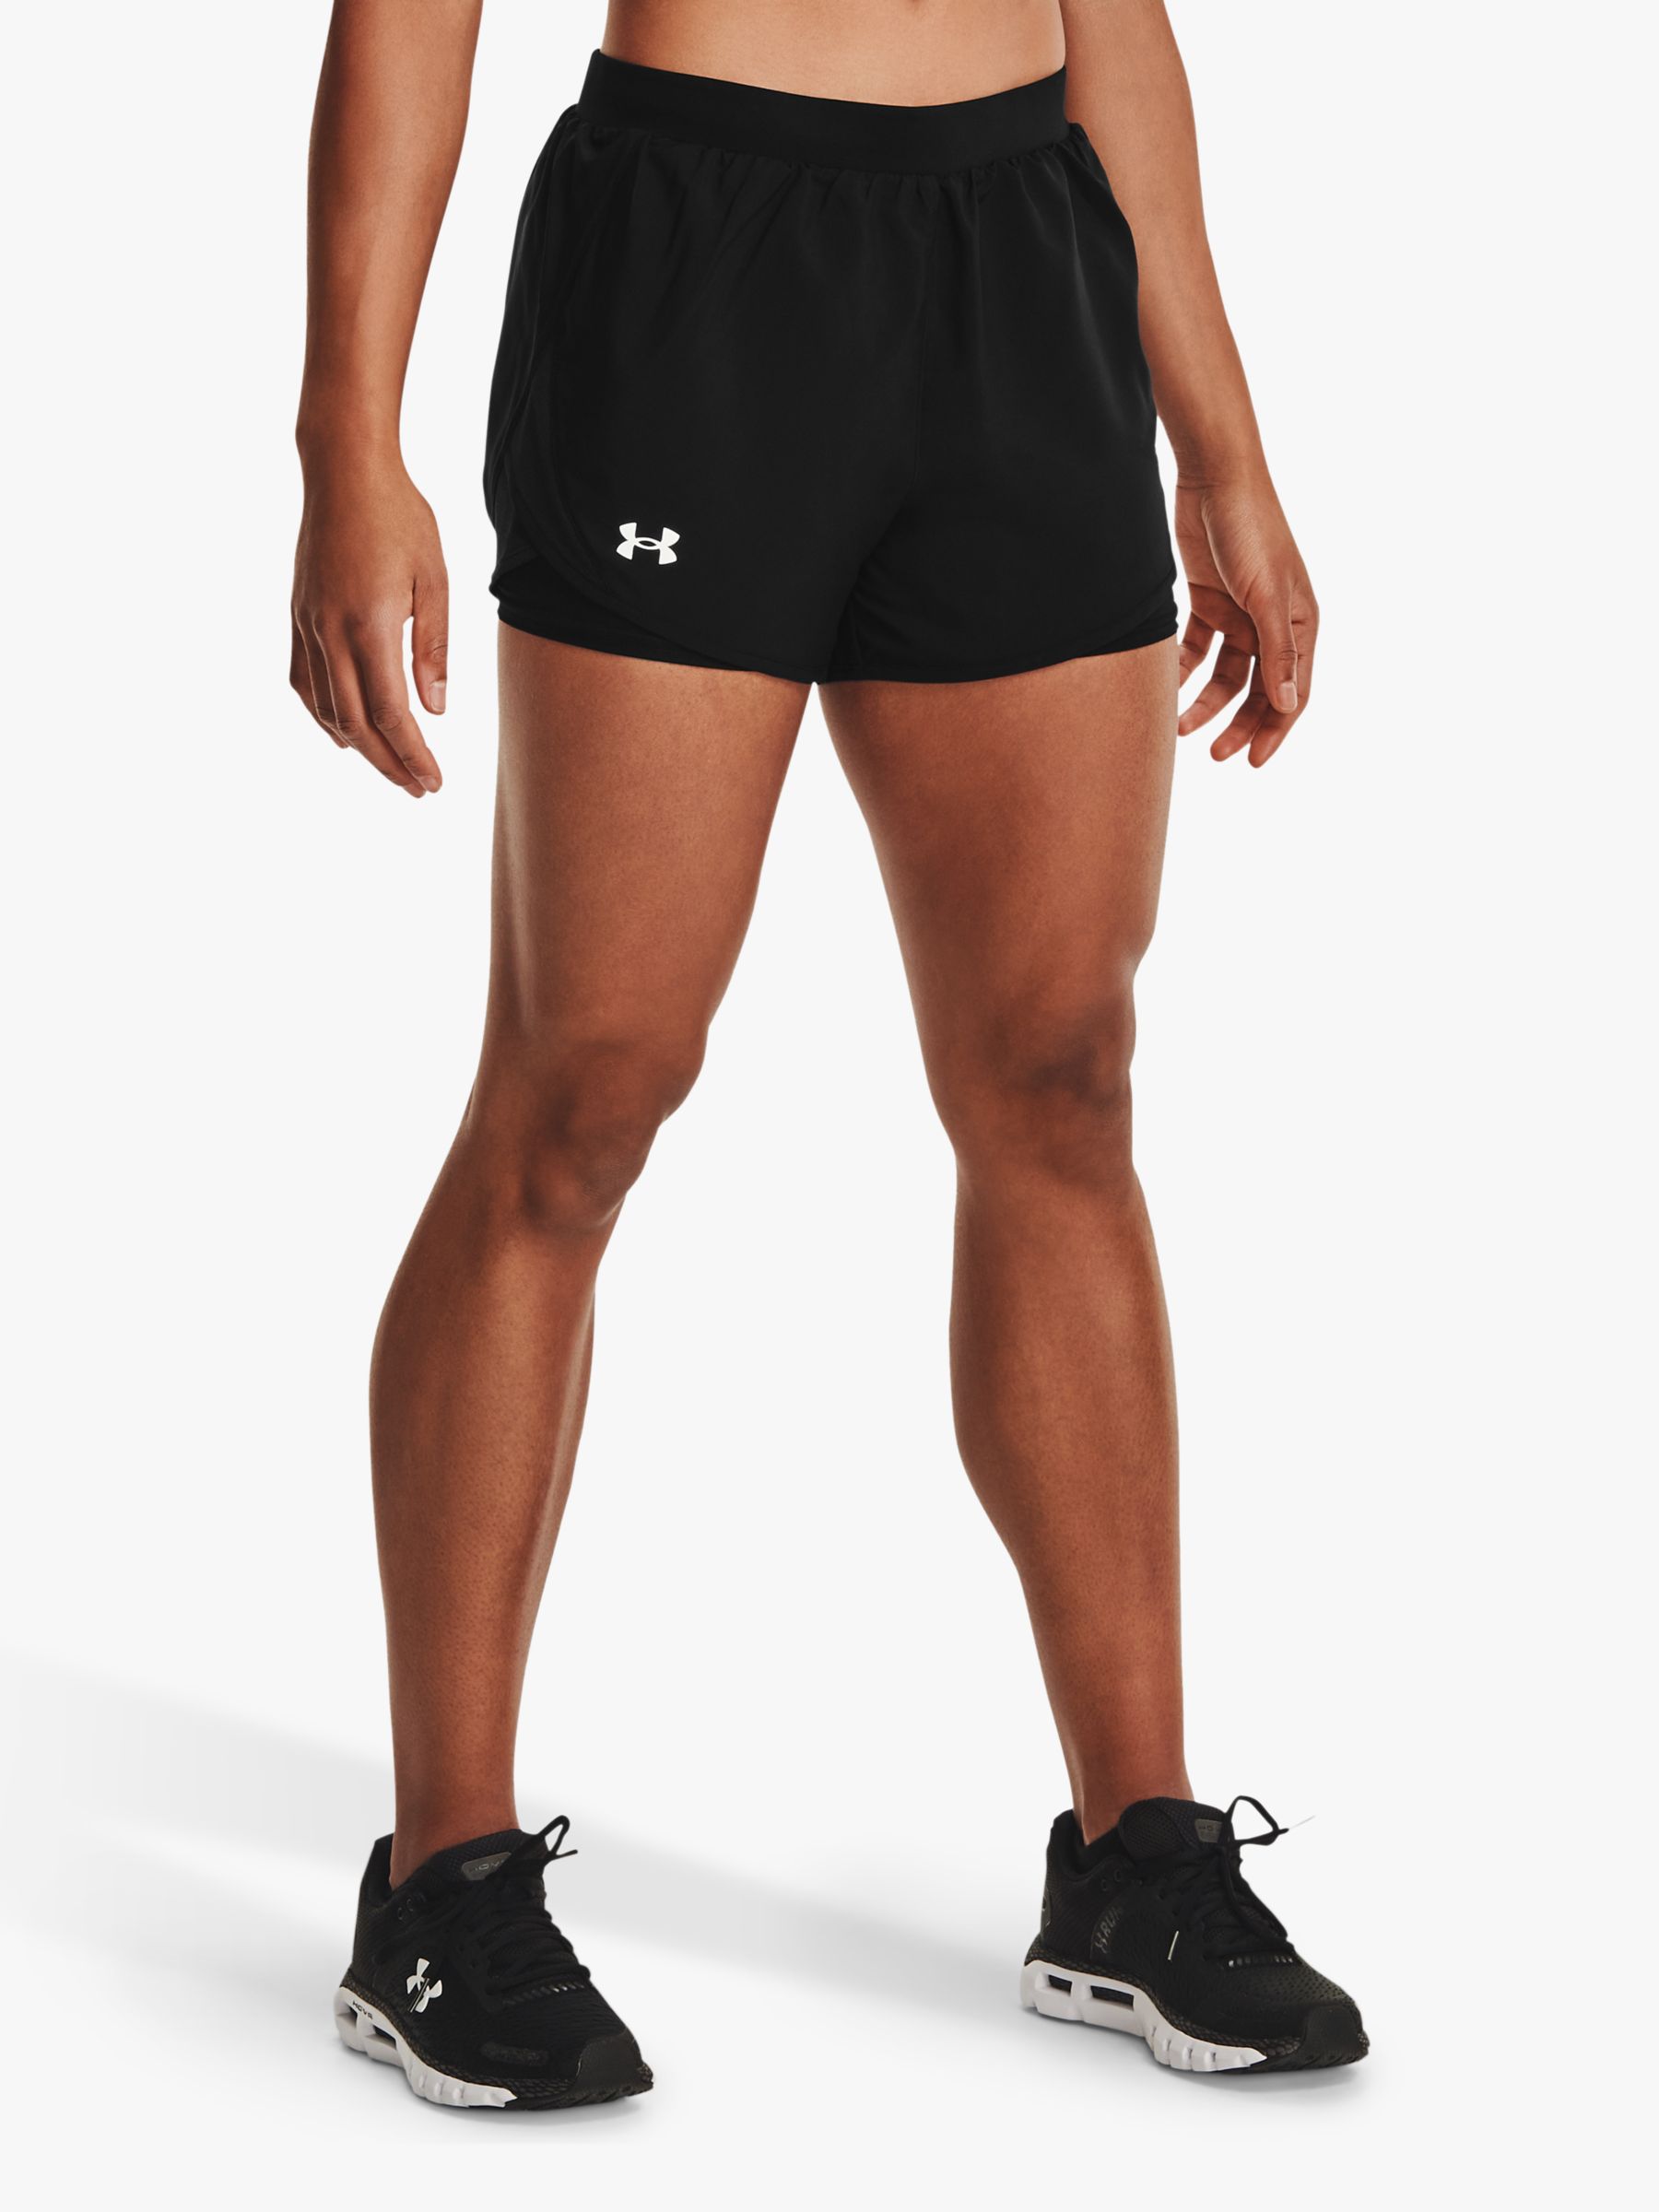 Under Armour Fly By 2.0 2-in-1 Running Shorts, Black, XS